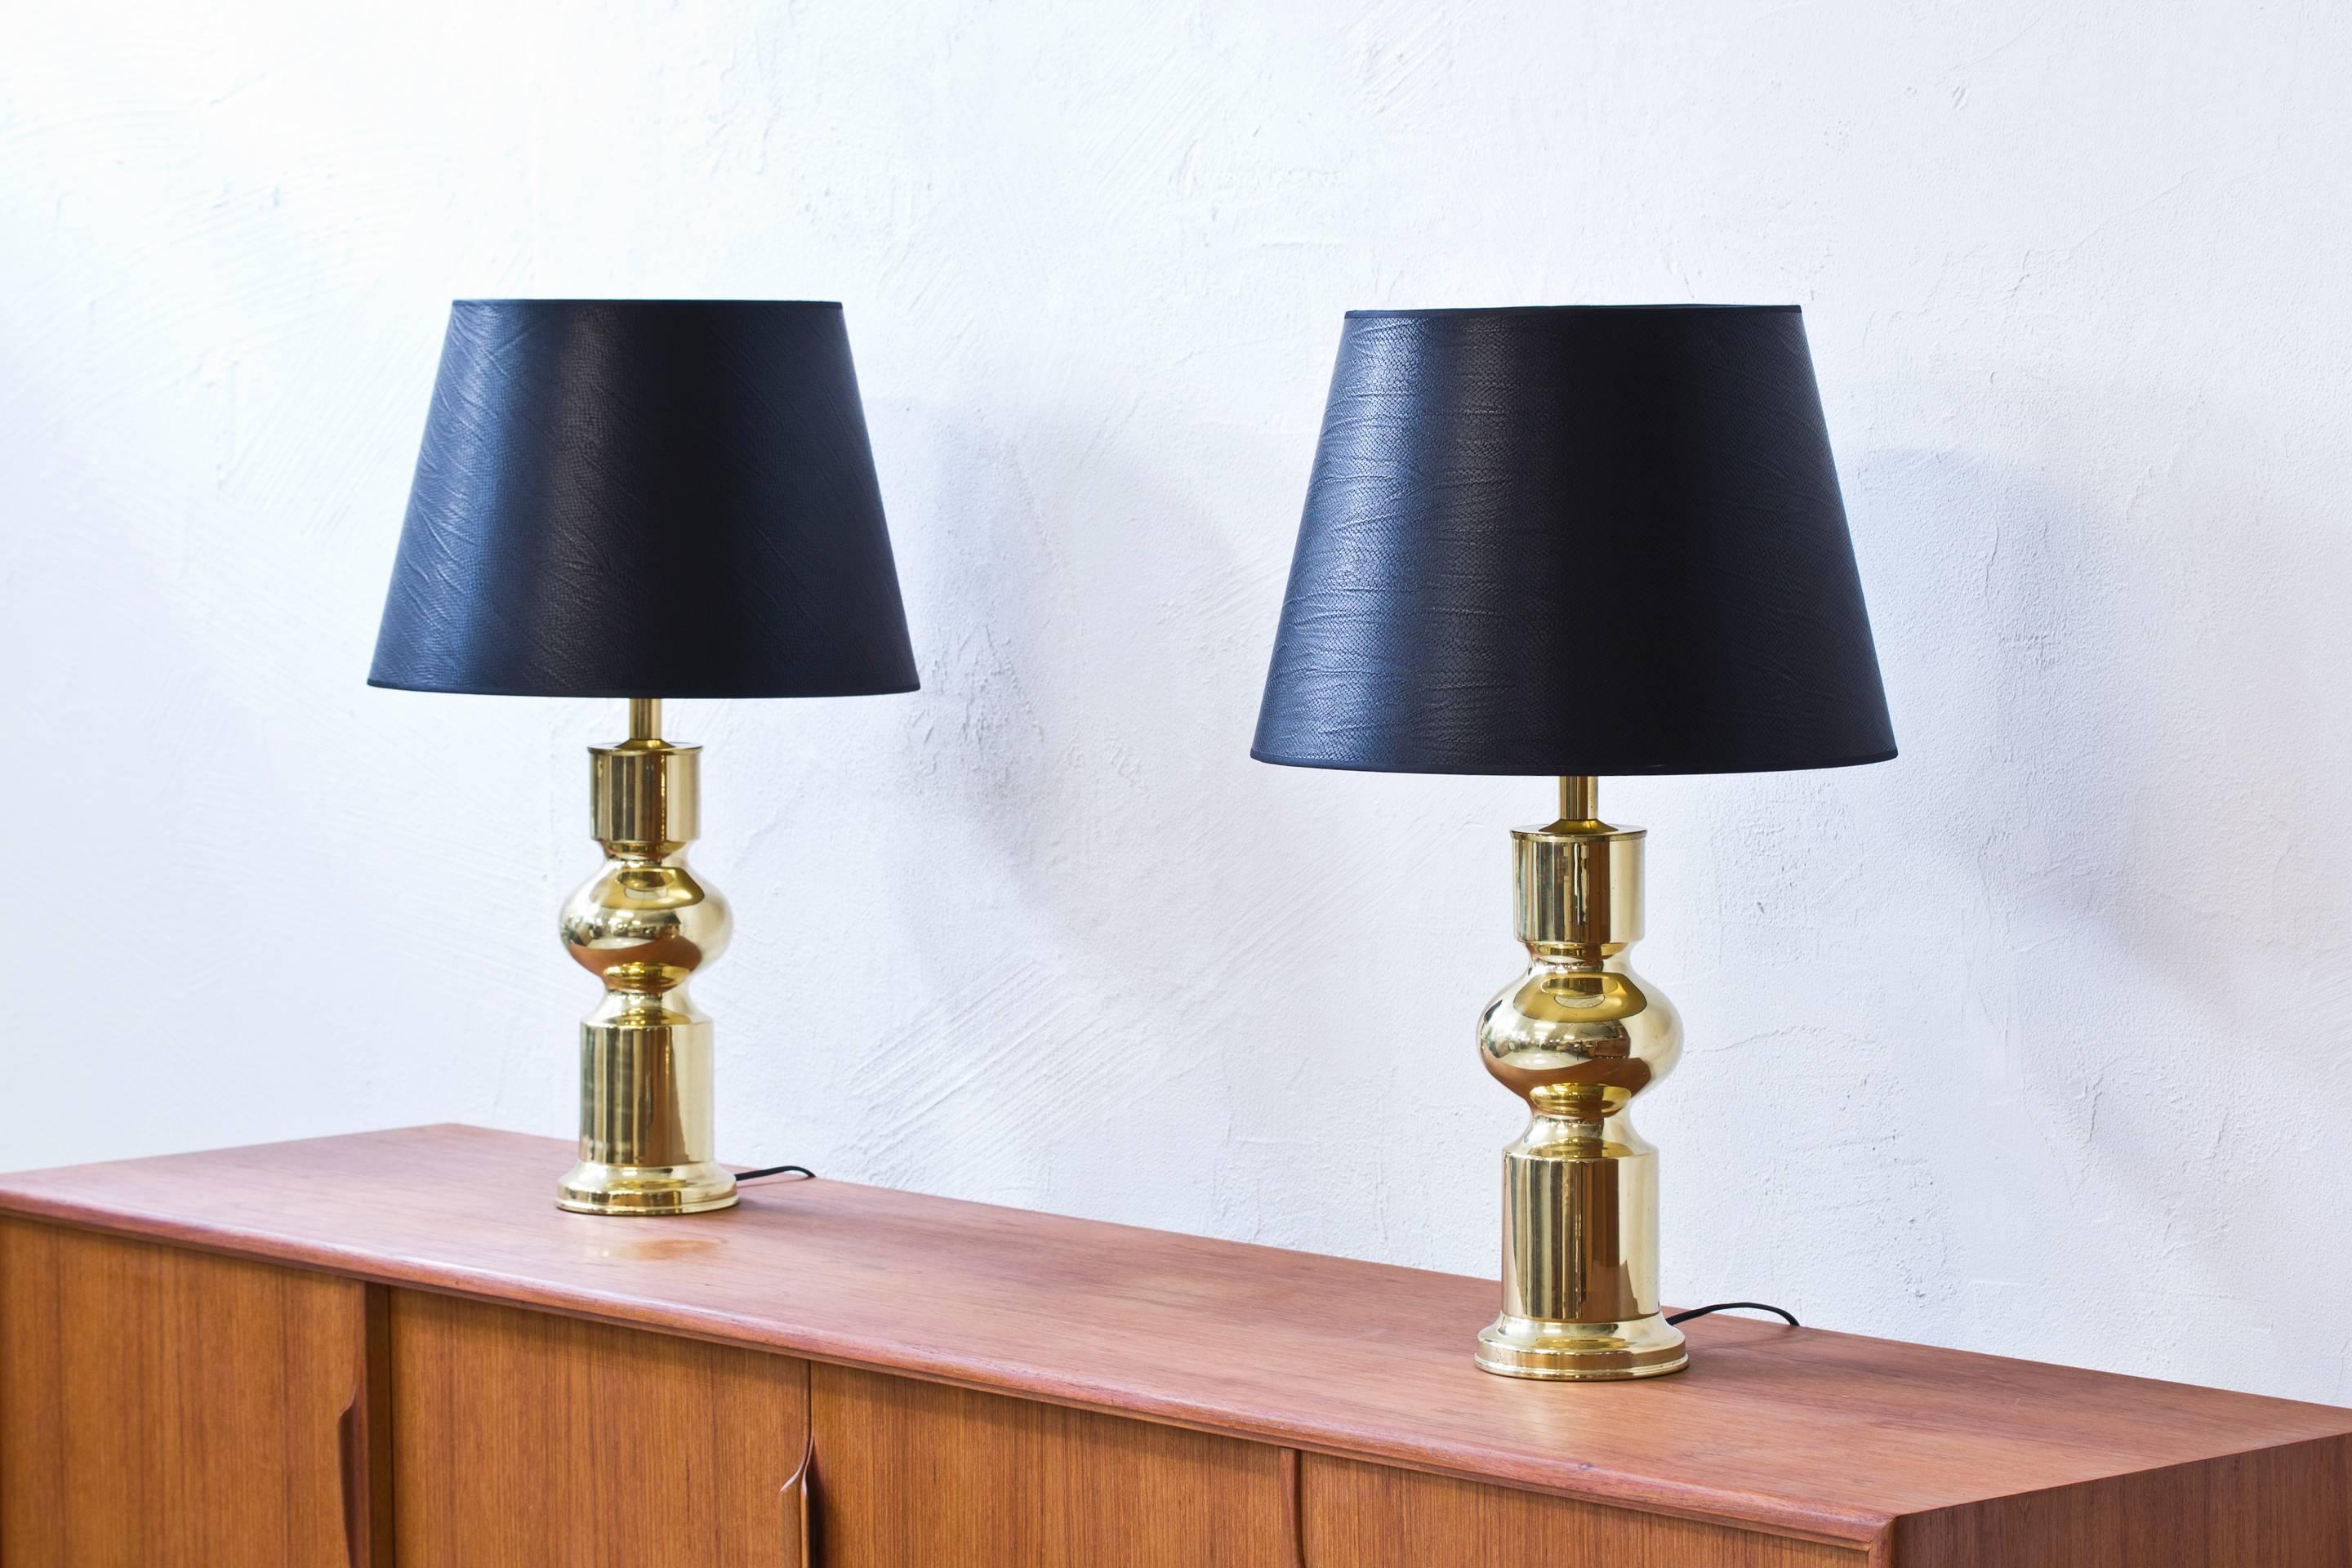 Pair of brass table lamps produced by Swedish company Aneta during the 1960s. With black lamp shades with crocodile impressed pattern and brass imitating inside for a warm glow. Light switch on the fixture in working condition. New electricity.